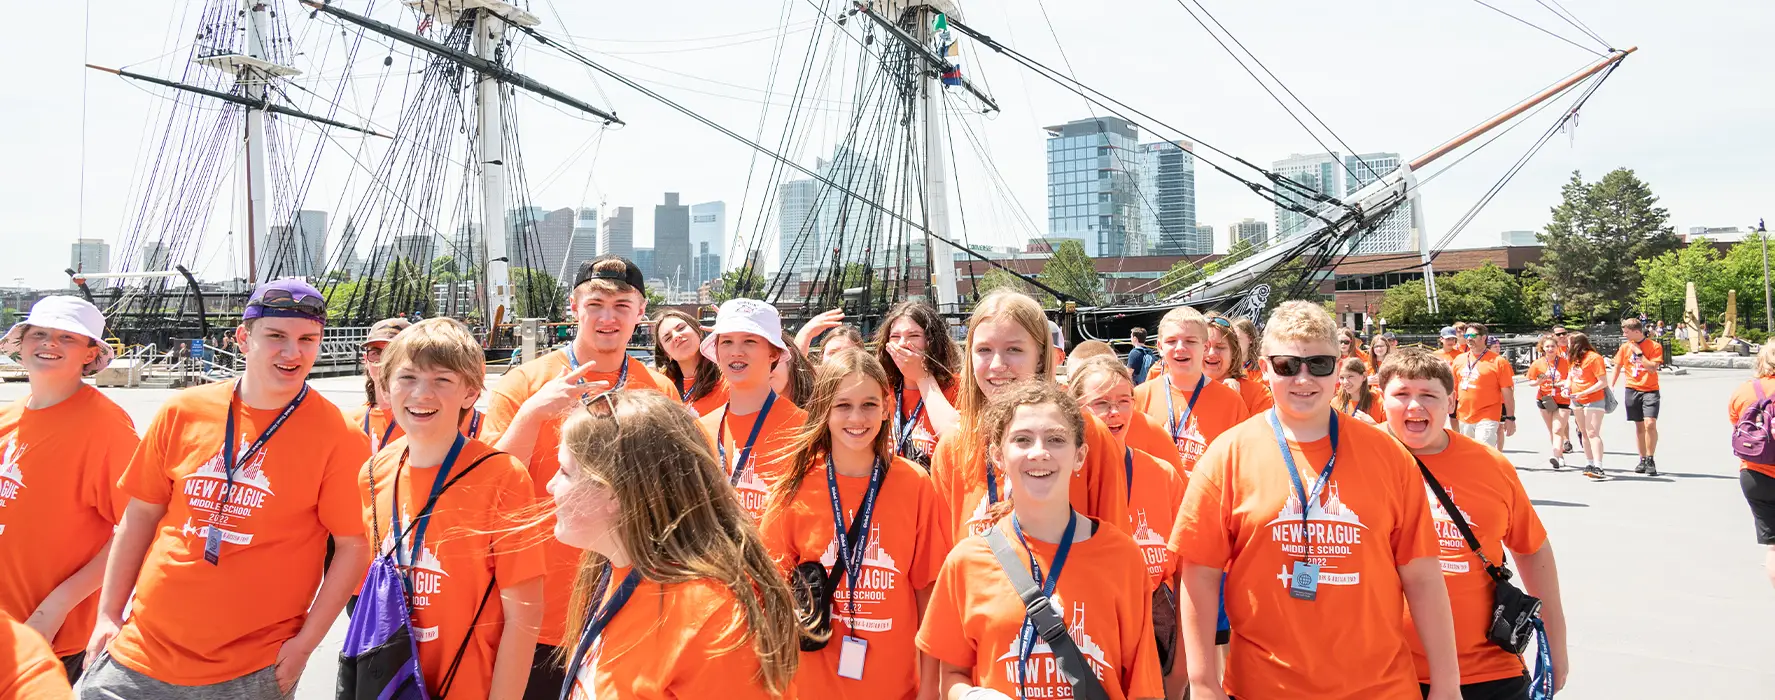 A group of students in orange shirts standing in front of ships with their sails lowered, with the Boston skyline in the background.